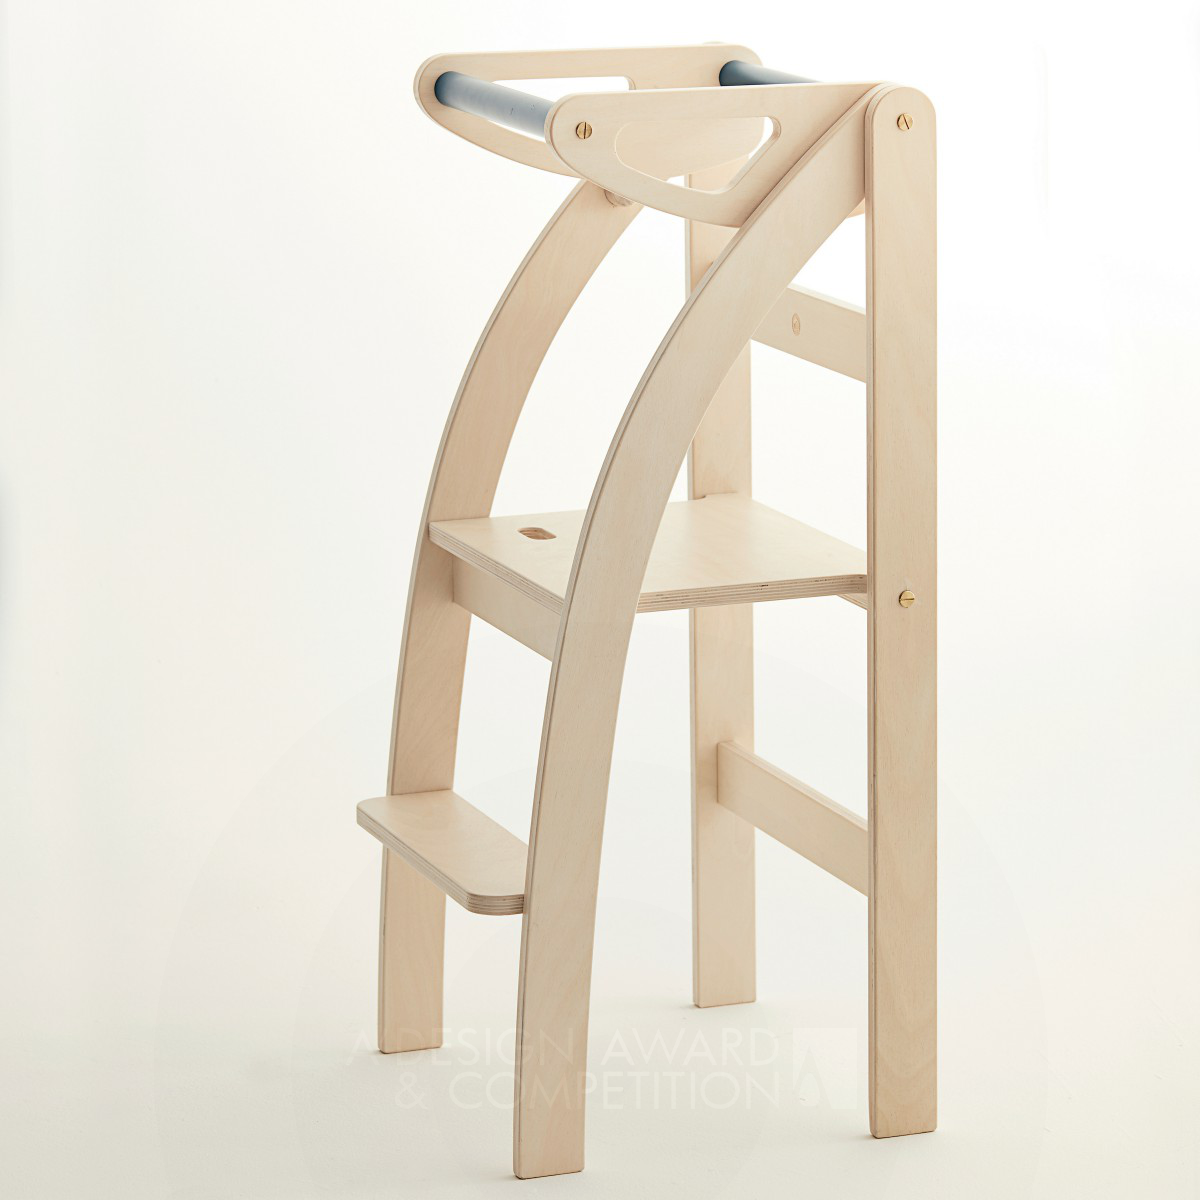 La Taue: The Foldable Learning Tower for Modern Families